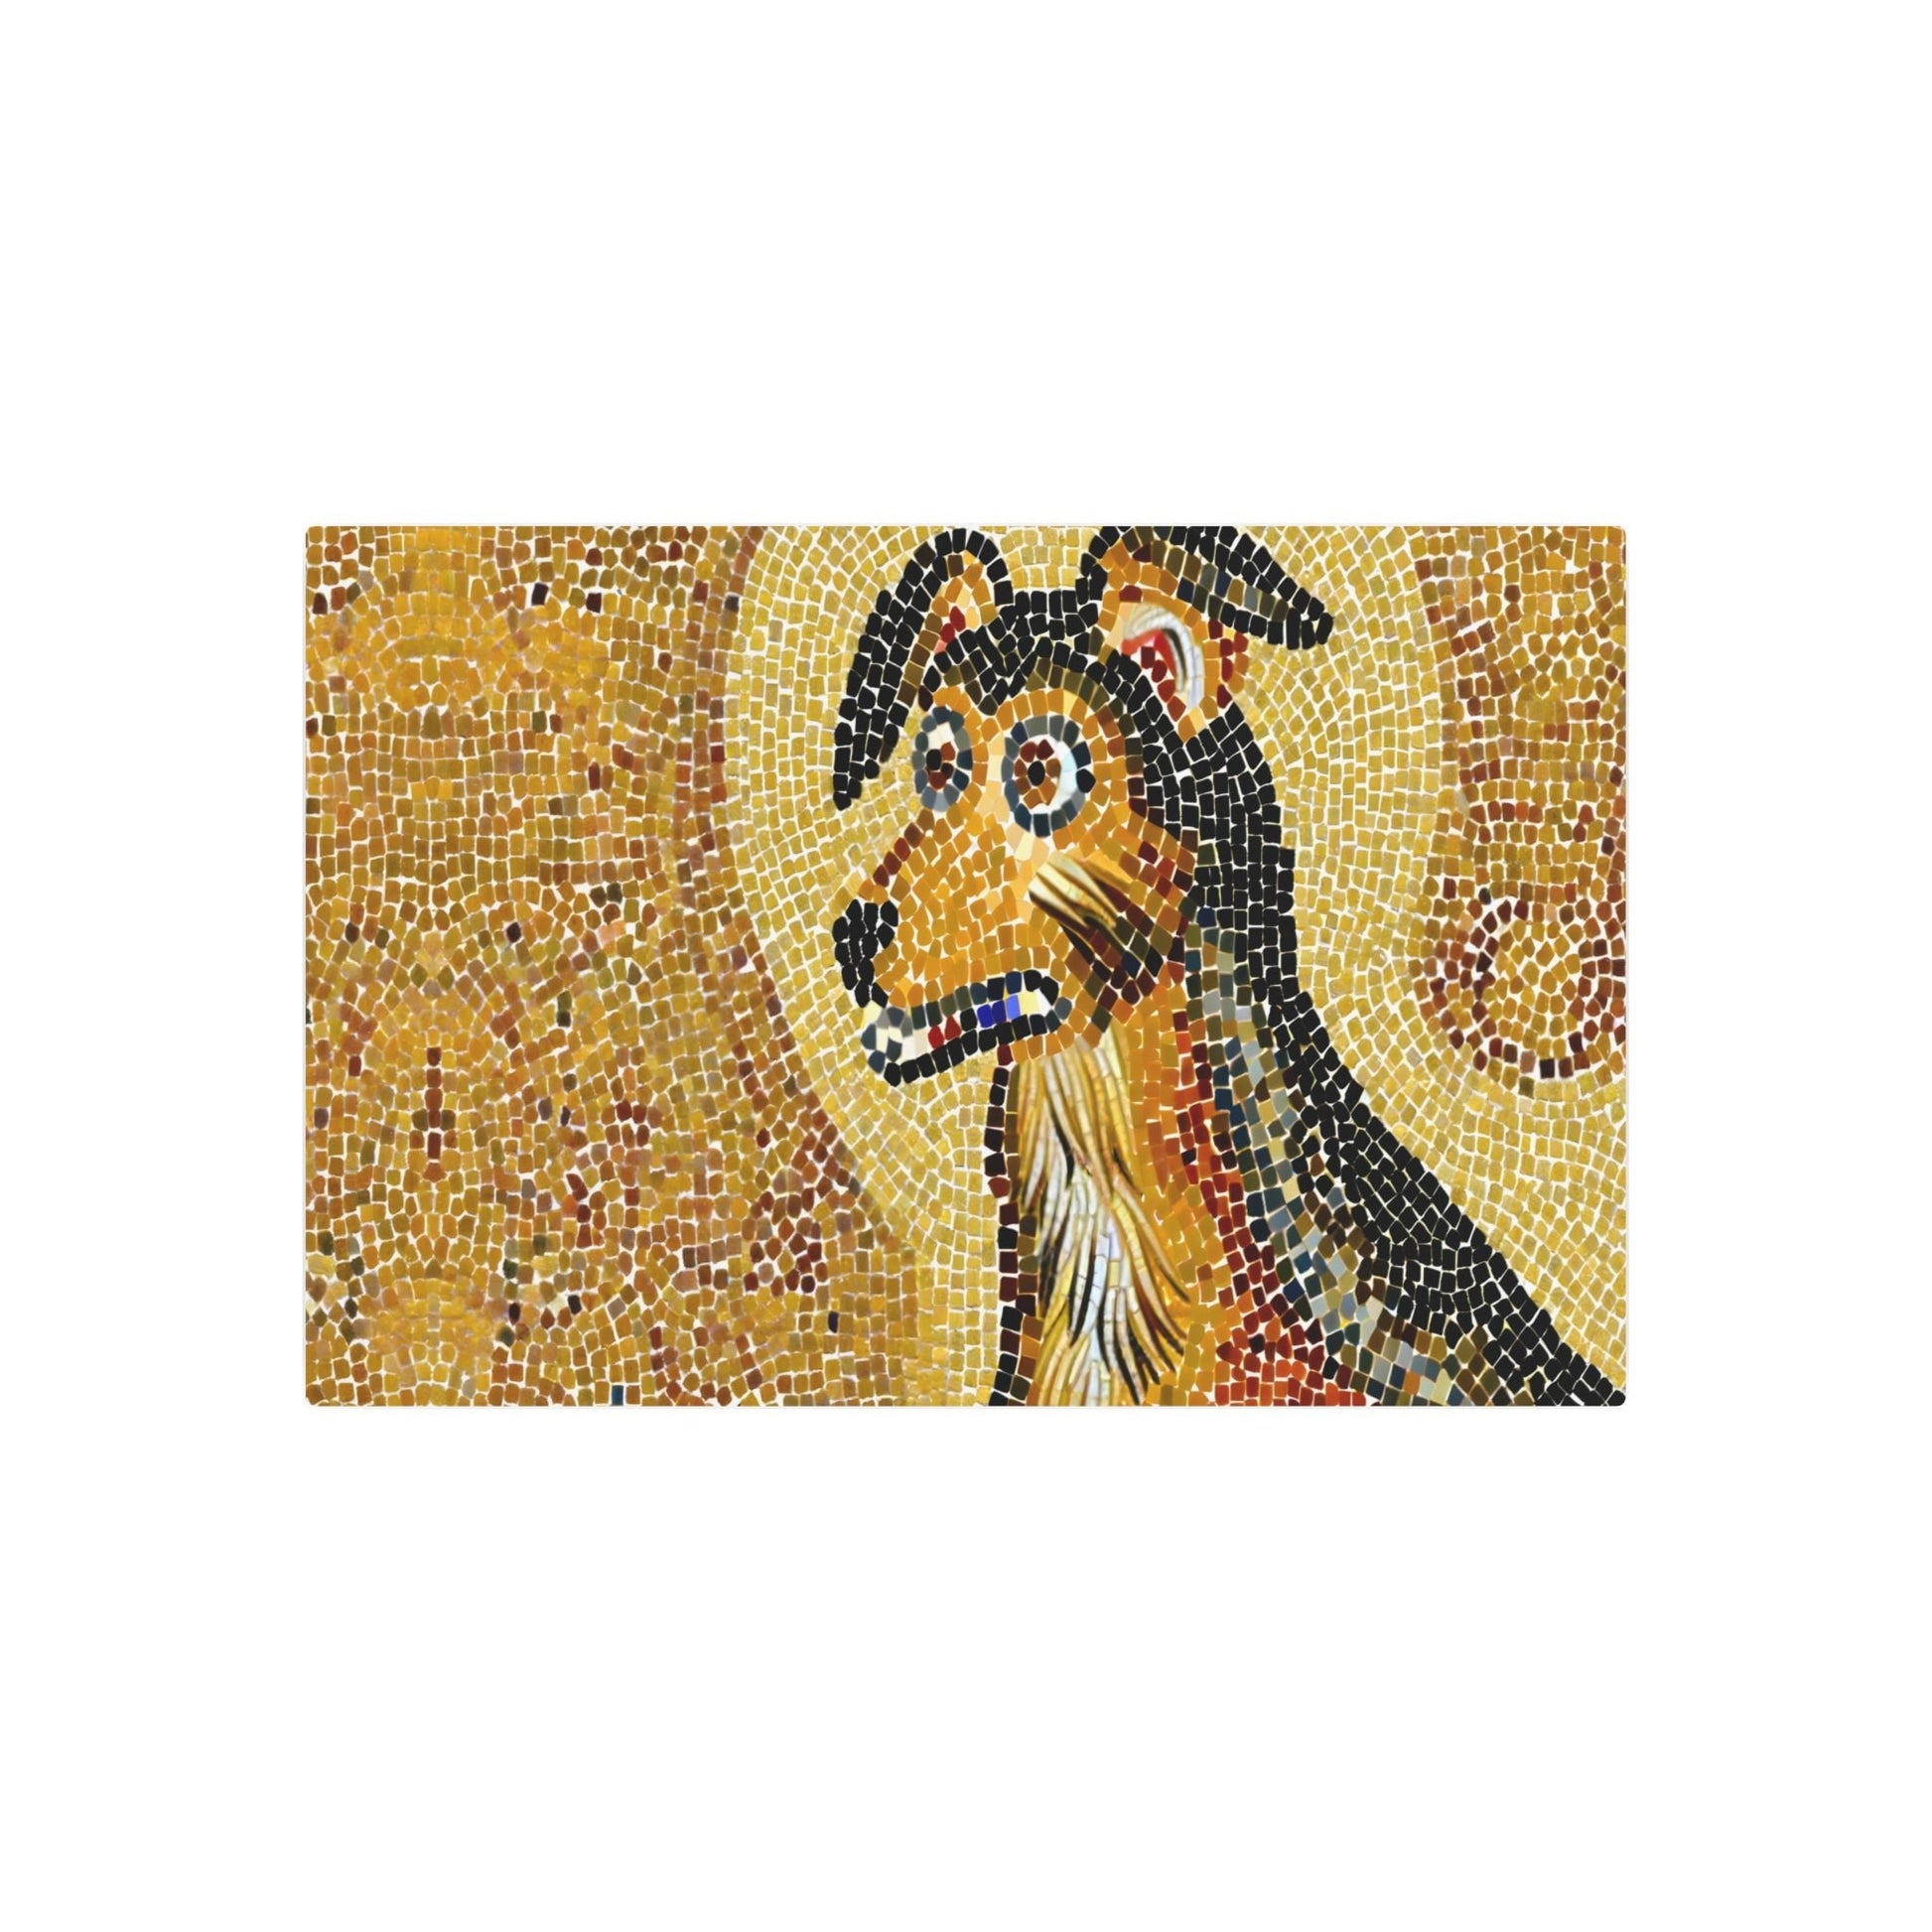 Metal Poster Art | "Byzantine Art Style Dog Image with Detailed Mosaics and Gold Backgrounds - Unique Non-Western & Global Styles Artwork" - Metal Poster Art 36″ x 24″ (Horizontal) 0.12''